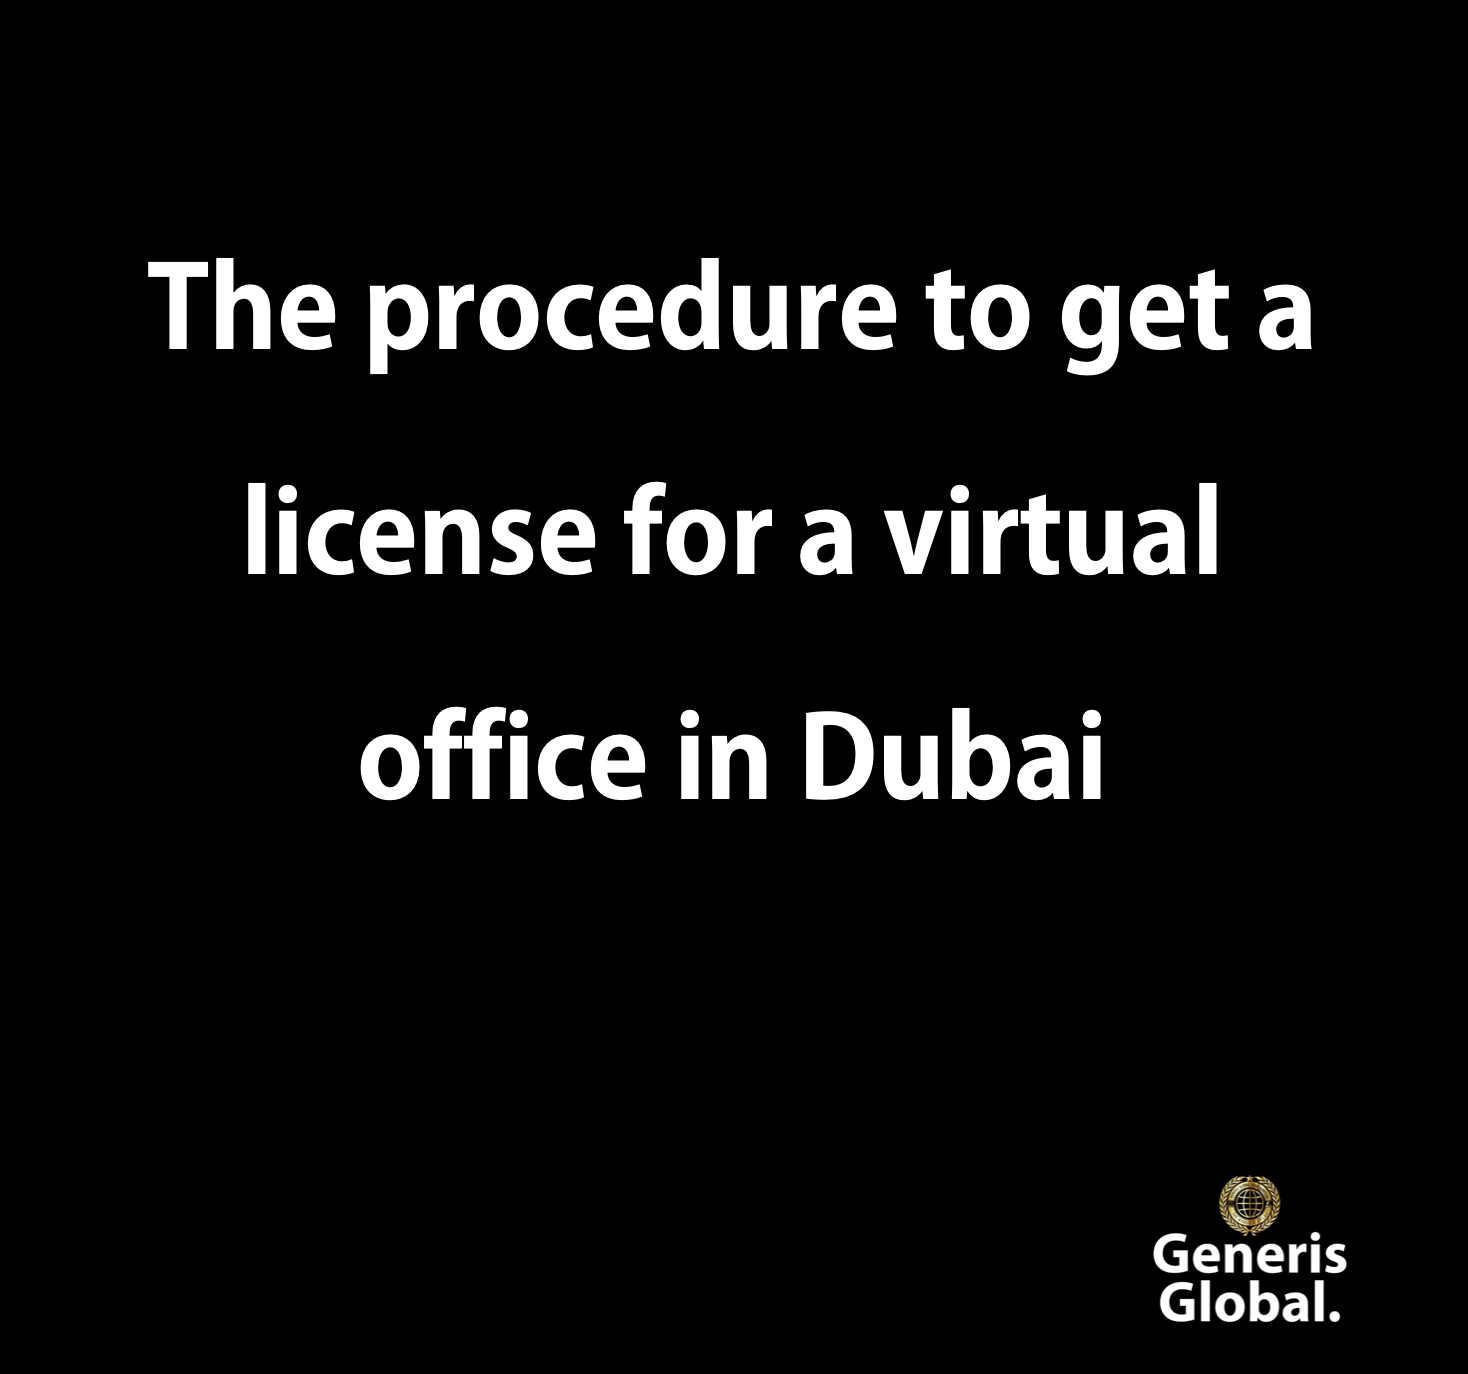 The procedure to get a license for a virtual office in Dubai